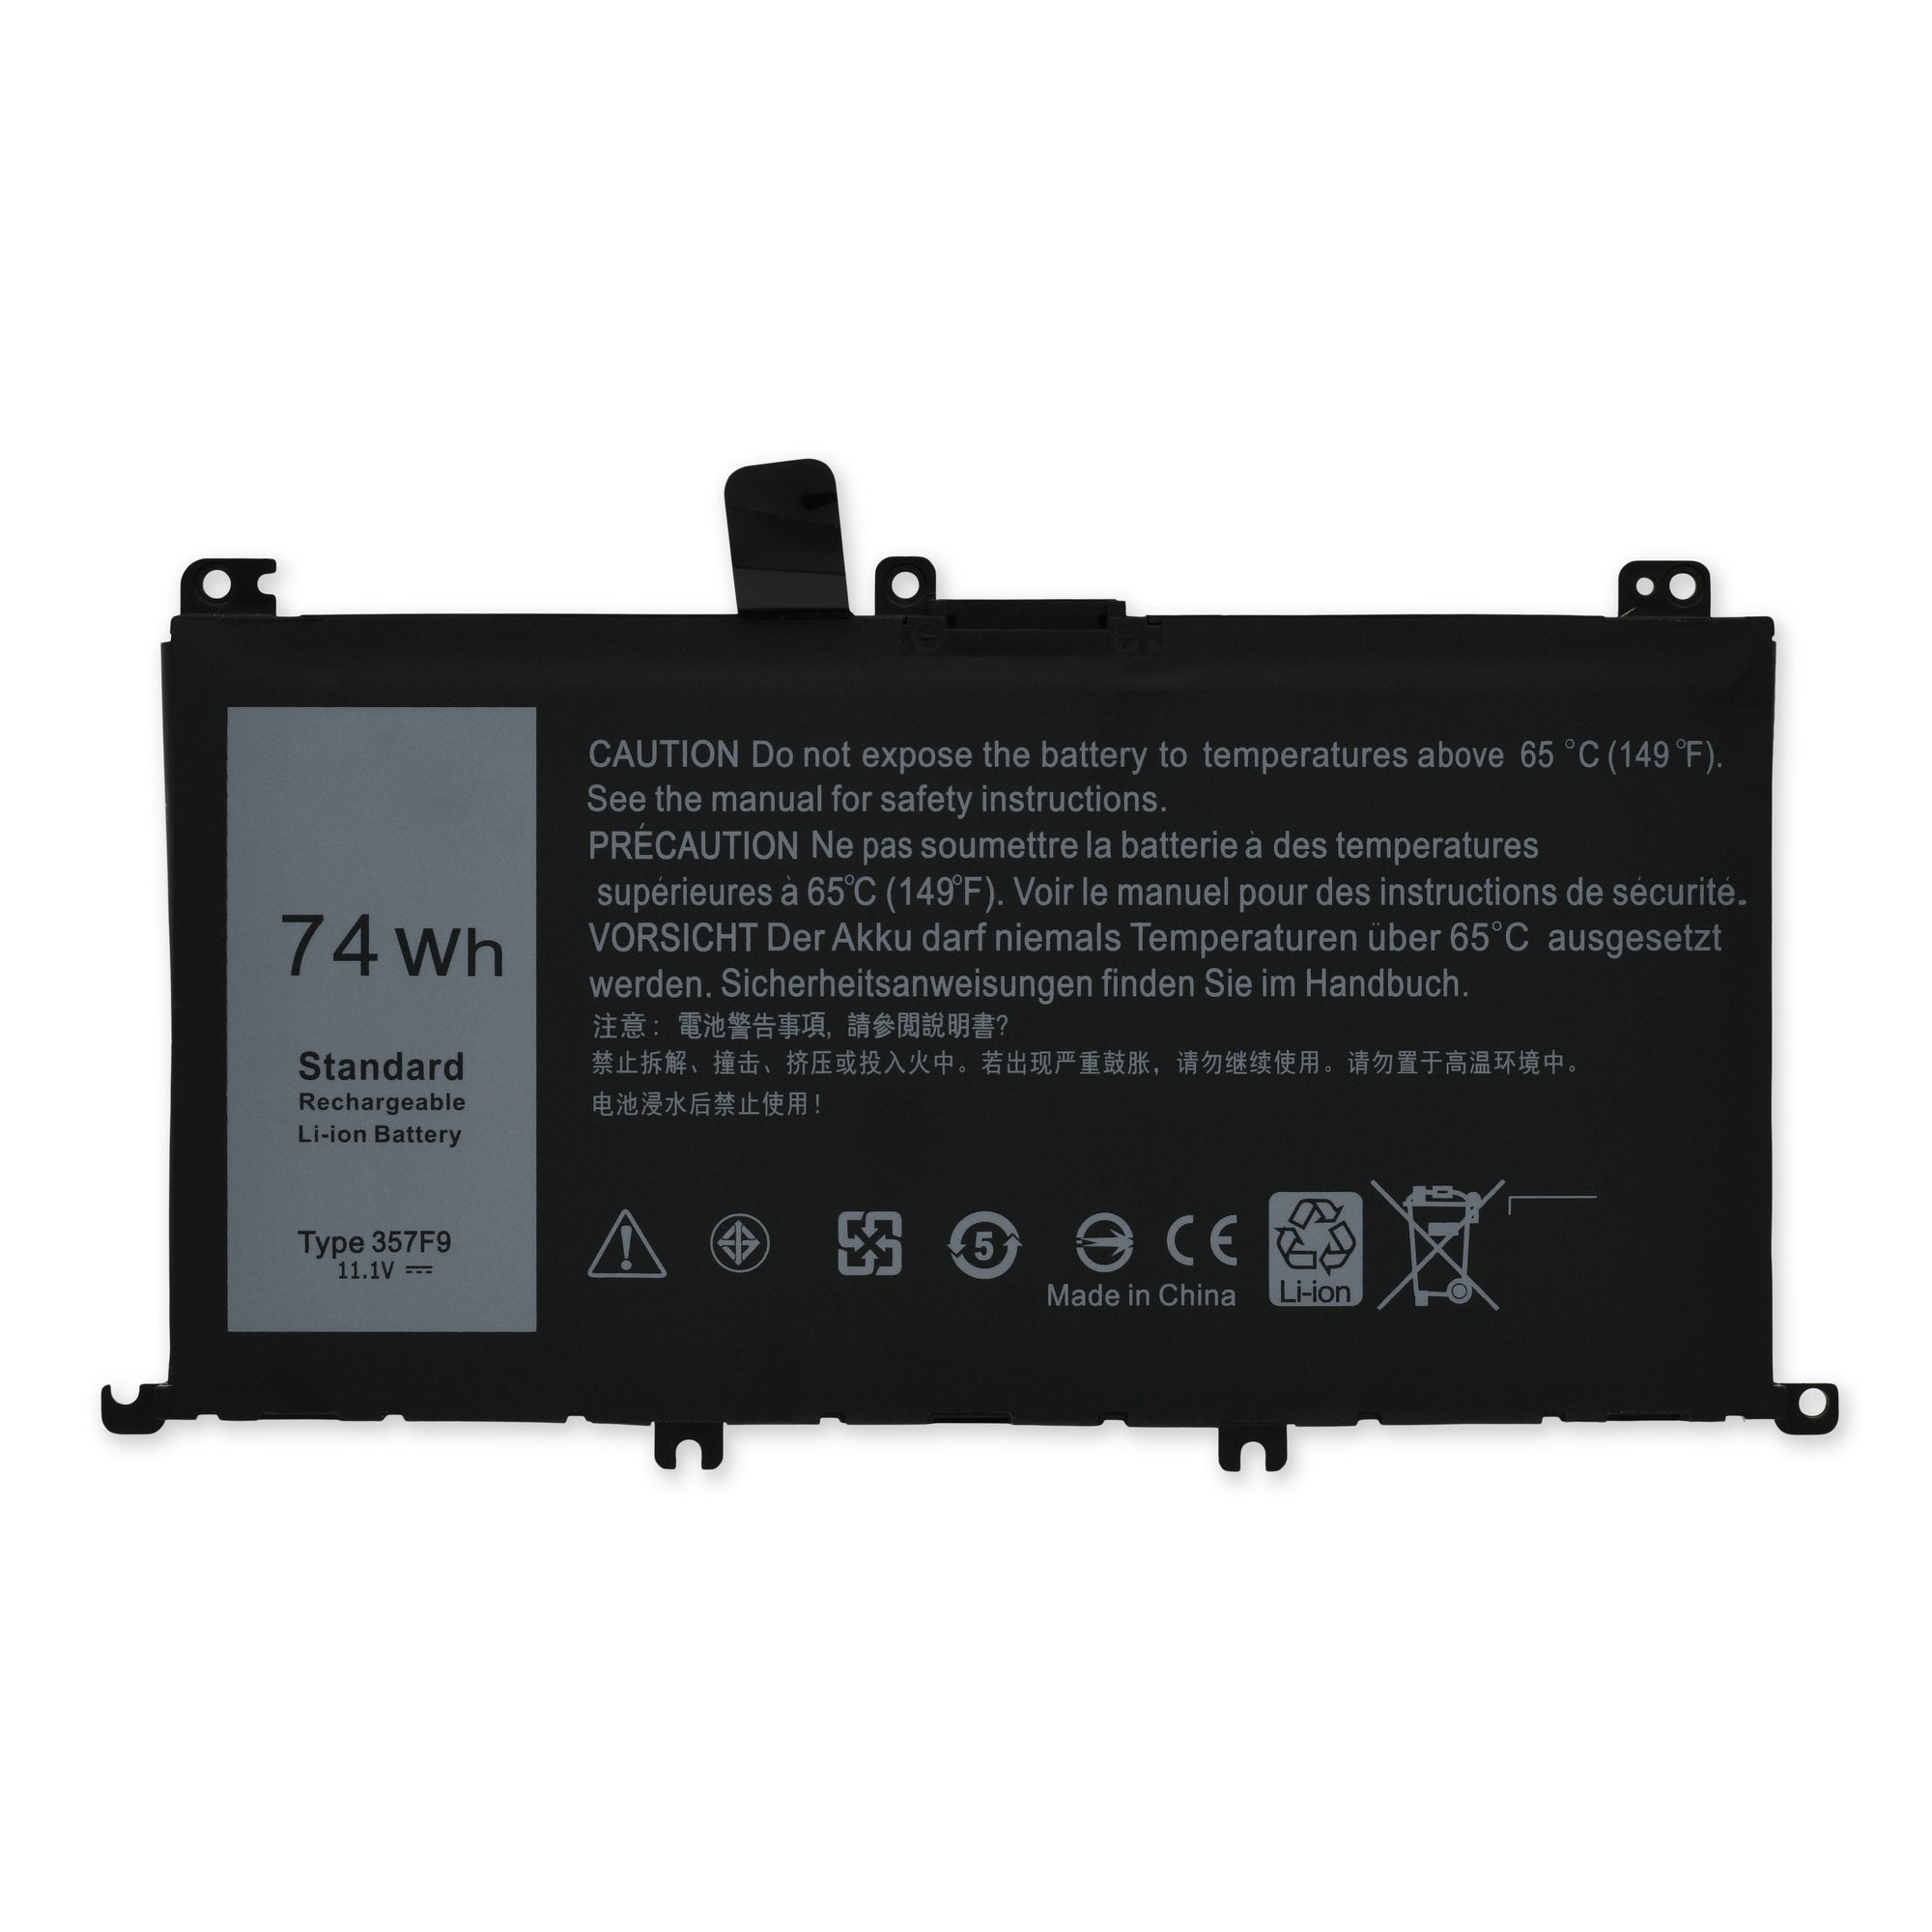 Dell Inspiron 15 357F9 Battery New Part Only